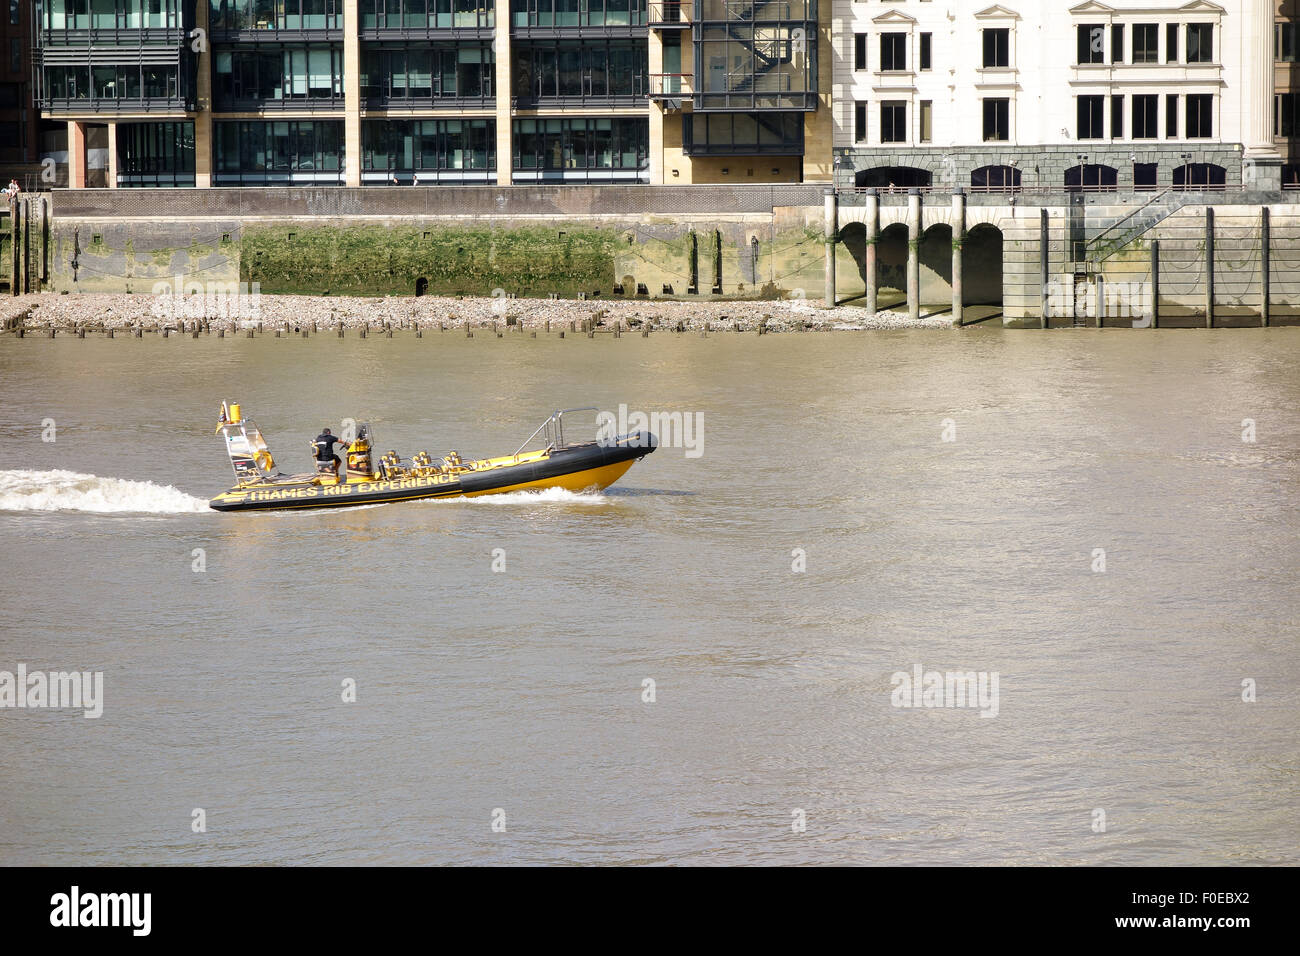 A speed boat travels along the River Thames in London. Stock Photo